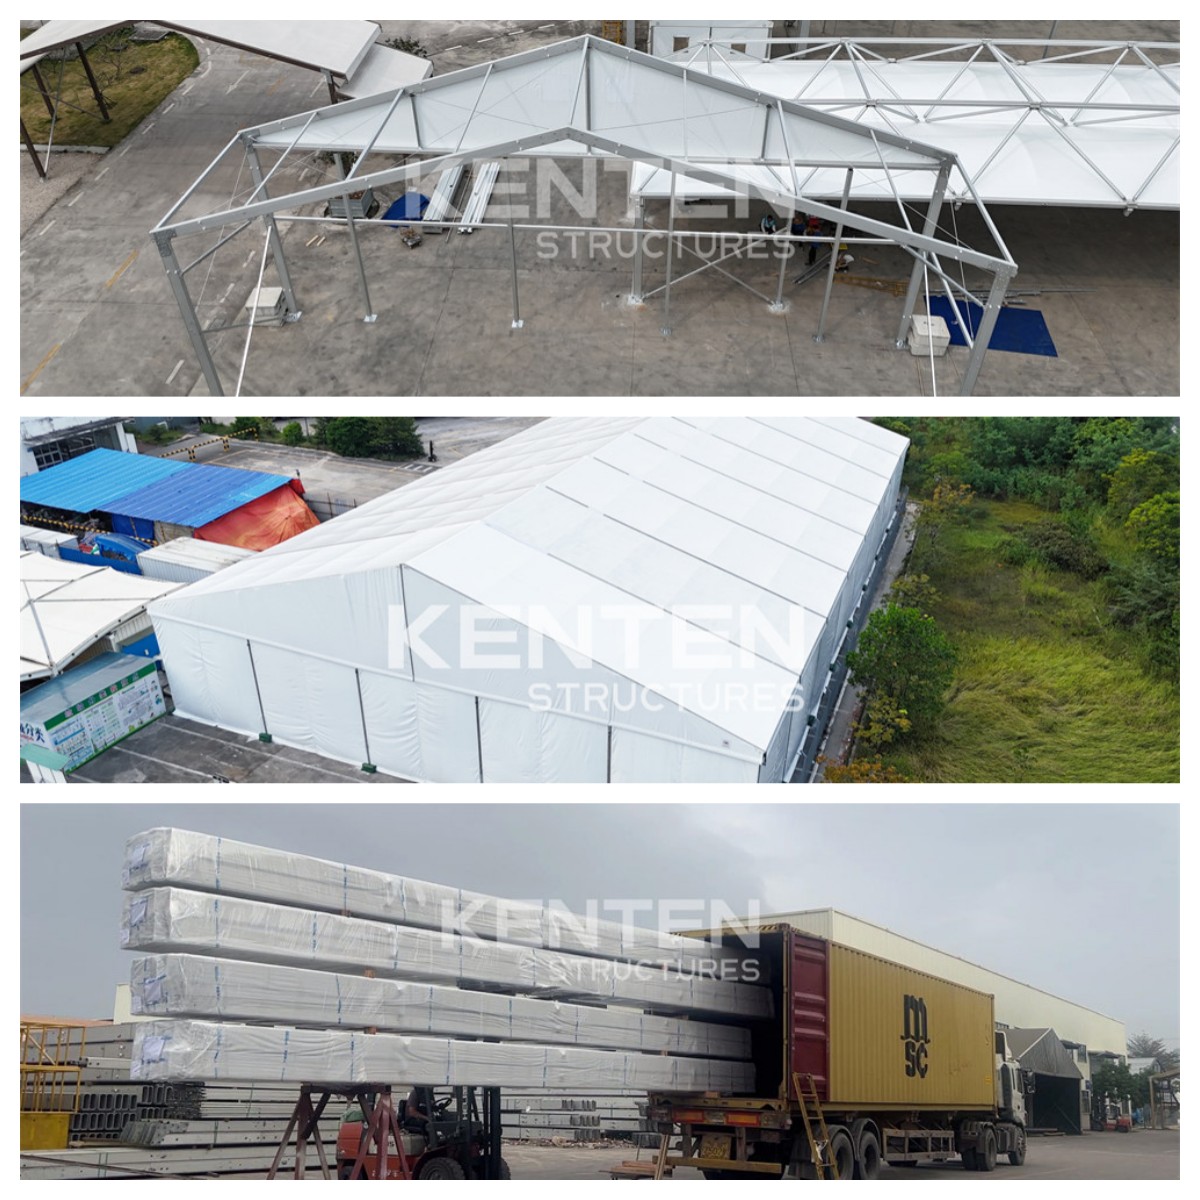 Shipping KENTEN warehouse tents to customers across the United States